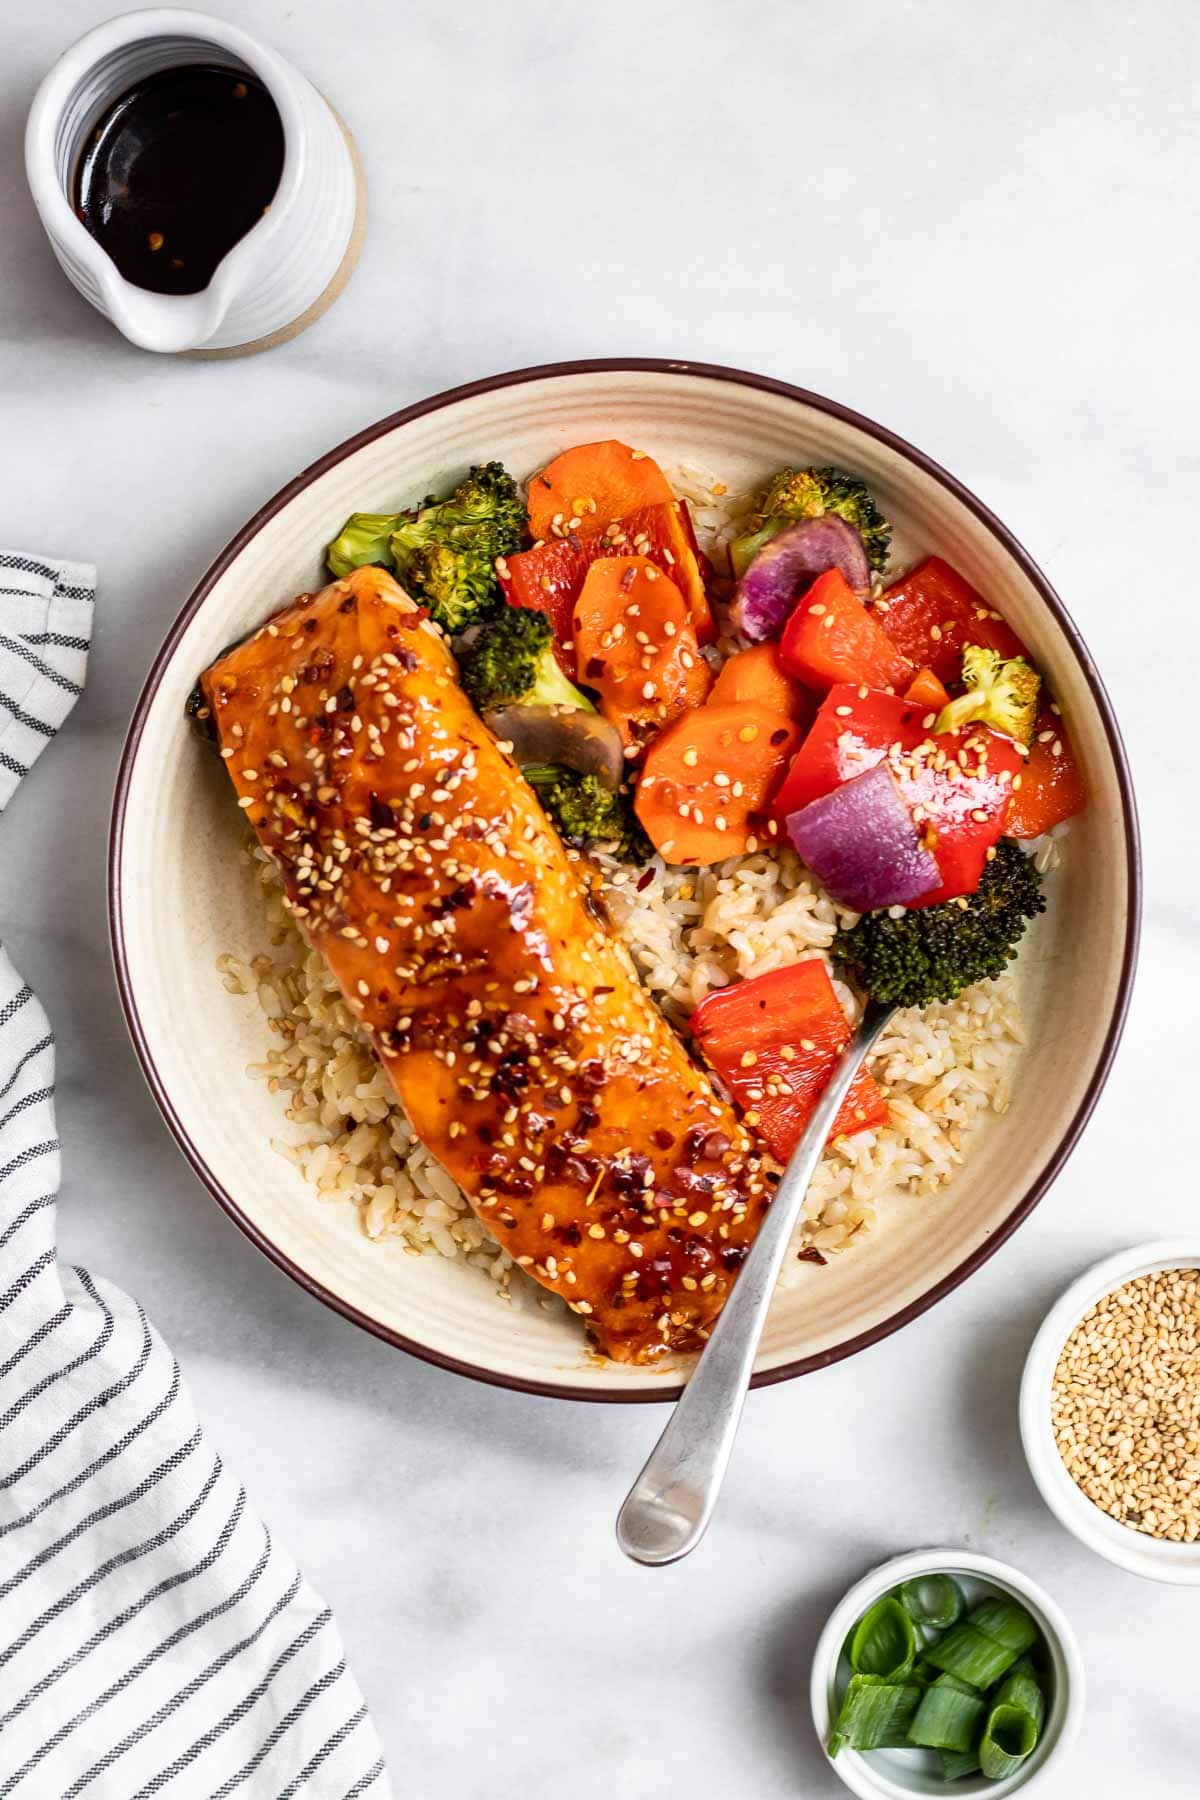 Maple soy glazed salmon on a bed of rice with roasted vegetables.